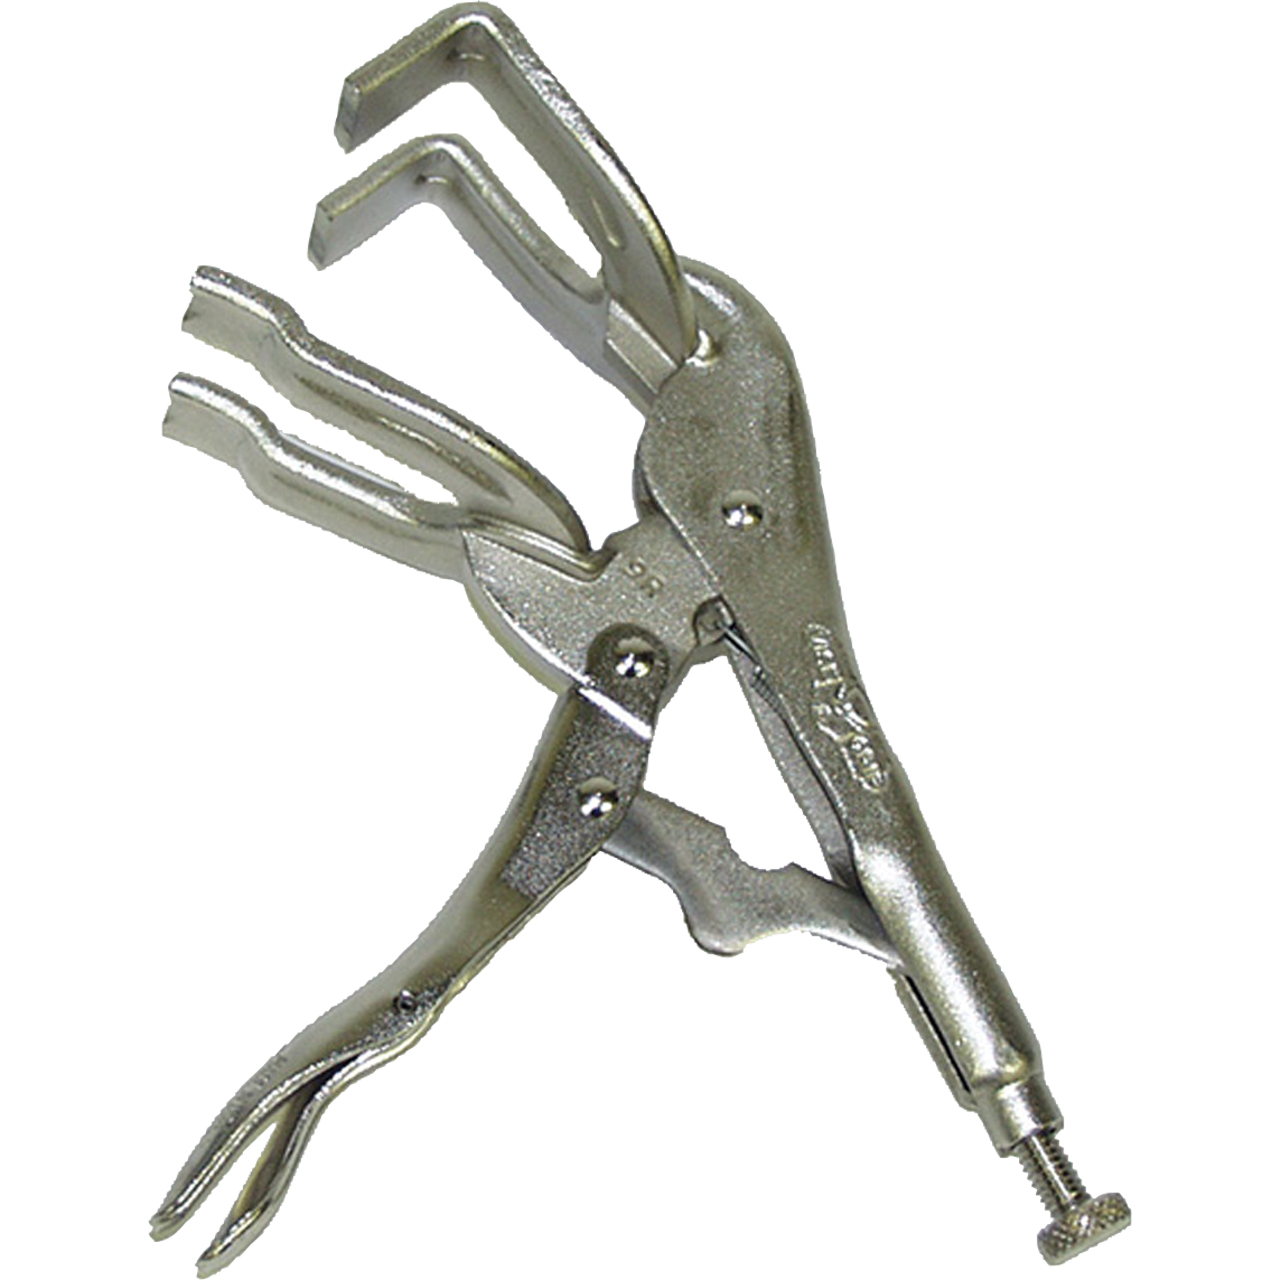 This Could be Your Last Chance to Buy USA-made Vise Grip Locking Pliers